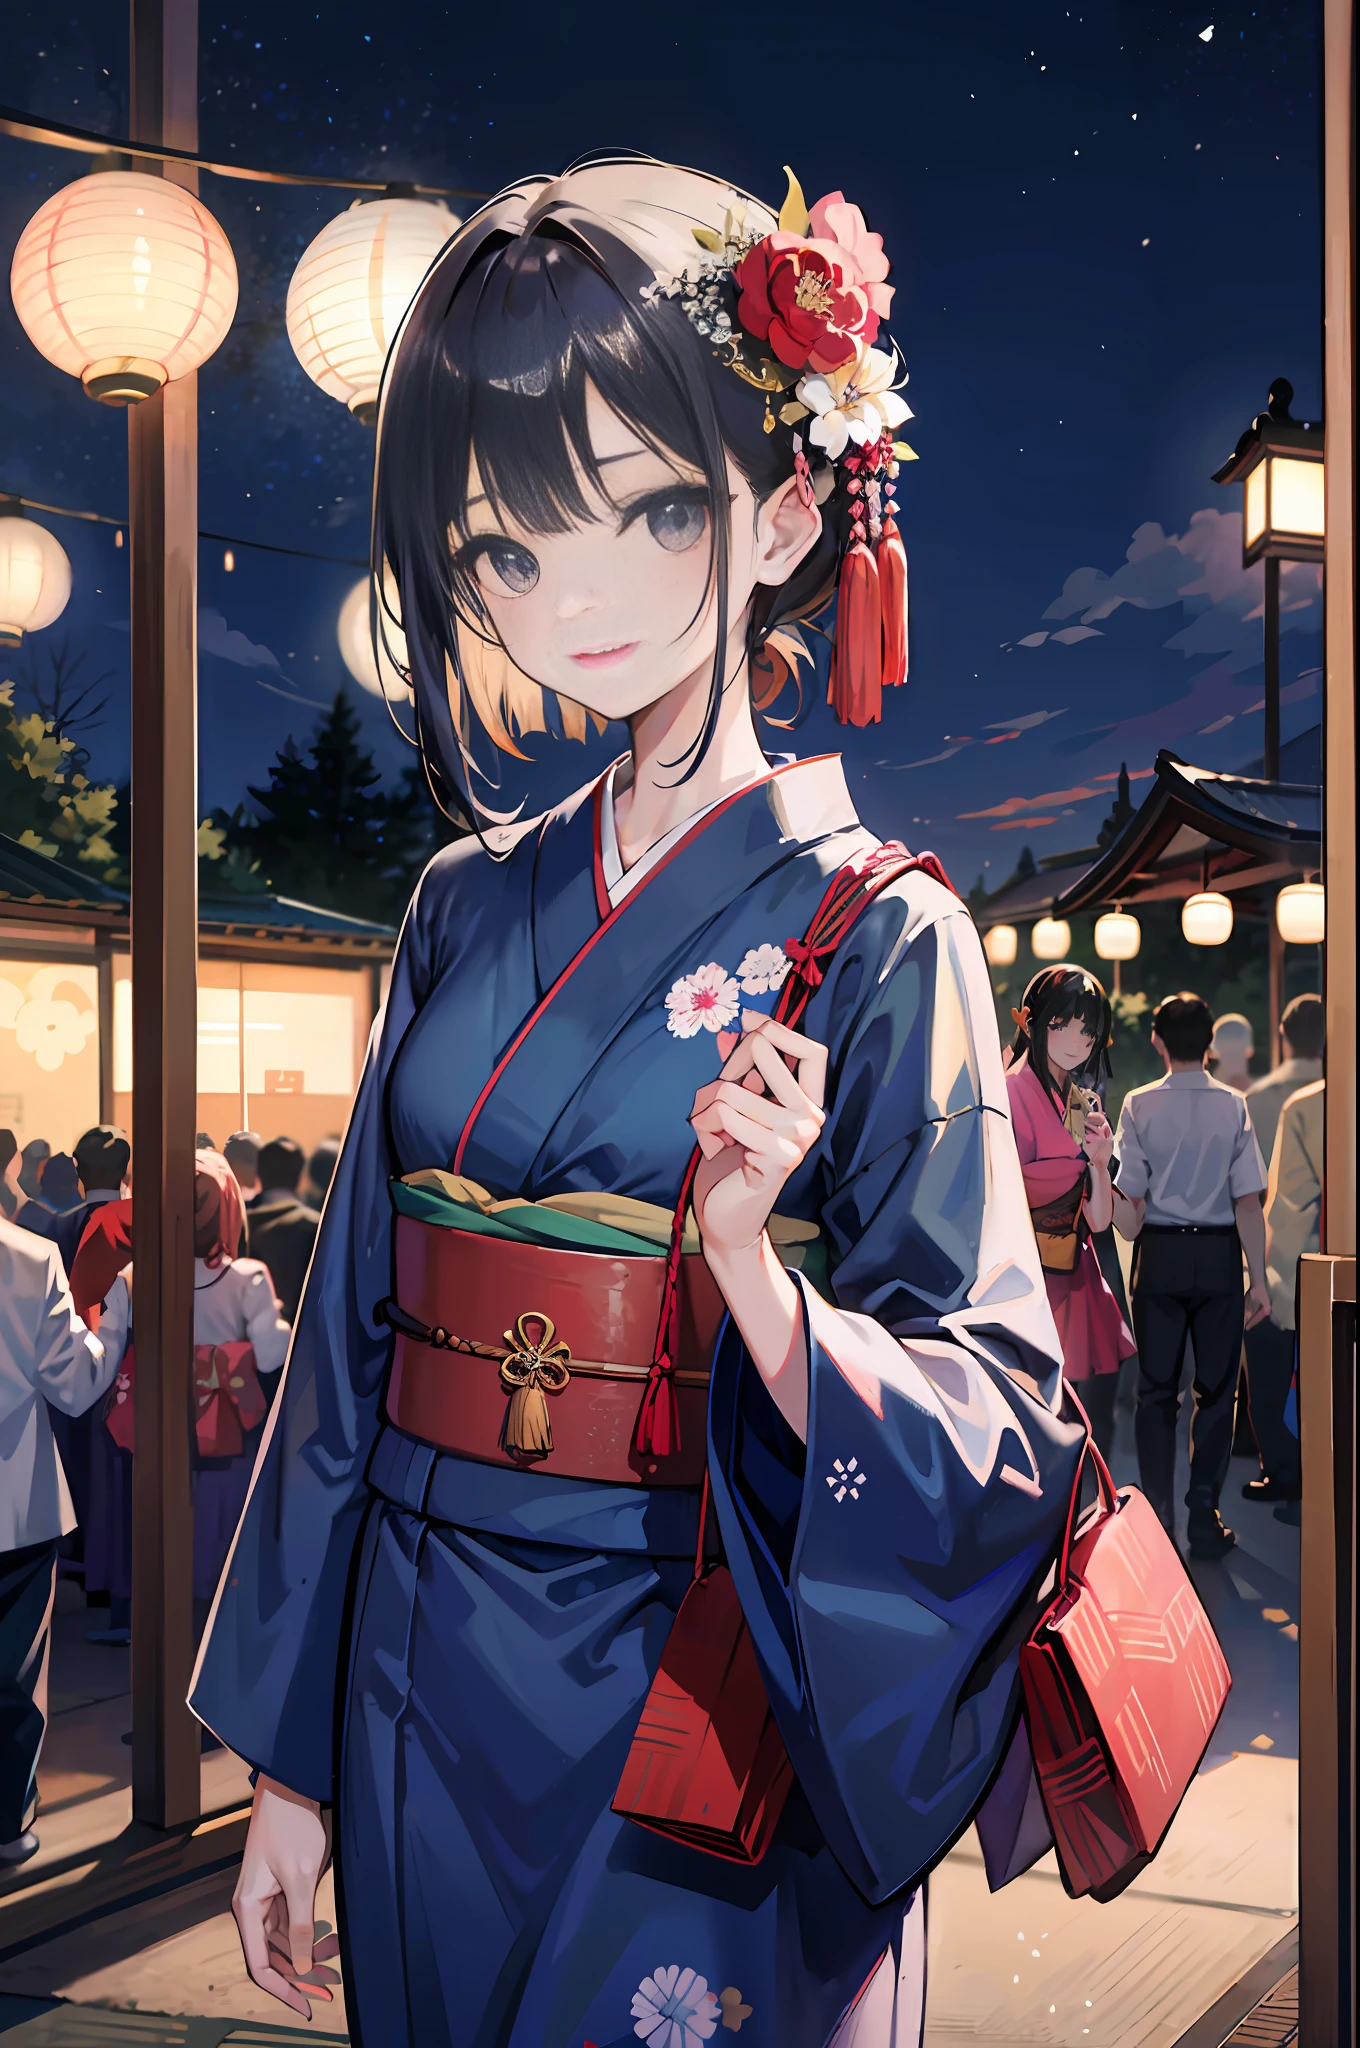 (a masterpiece of、beste-Qualit:1.2)、ultra hyper-detailed、lighting like a movie、（（（Beautiful woman going out to summer festival）））、fair、A smile、woman wearing the kimono, bath robe, classy yukata clothing, Wearing a colorful yukata, in a kimono, Wearing a kimono, japanese kimono, in a kimono, Komono, wearing a haori, Dark blue yukata with morning glory pattern, A Japanese style, Wearing kimono,paper lanterns、Store、Crowds、